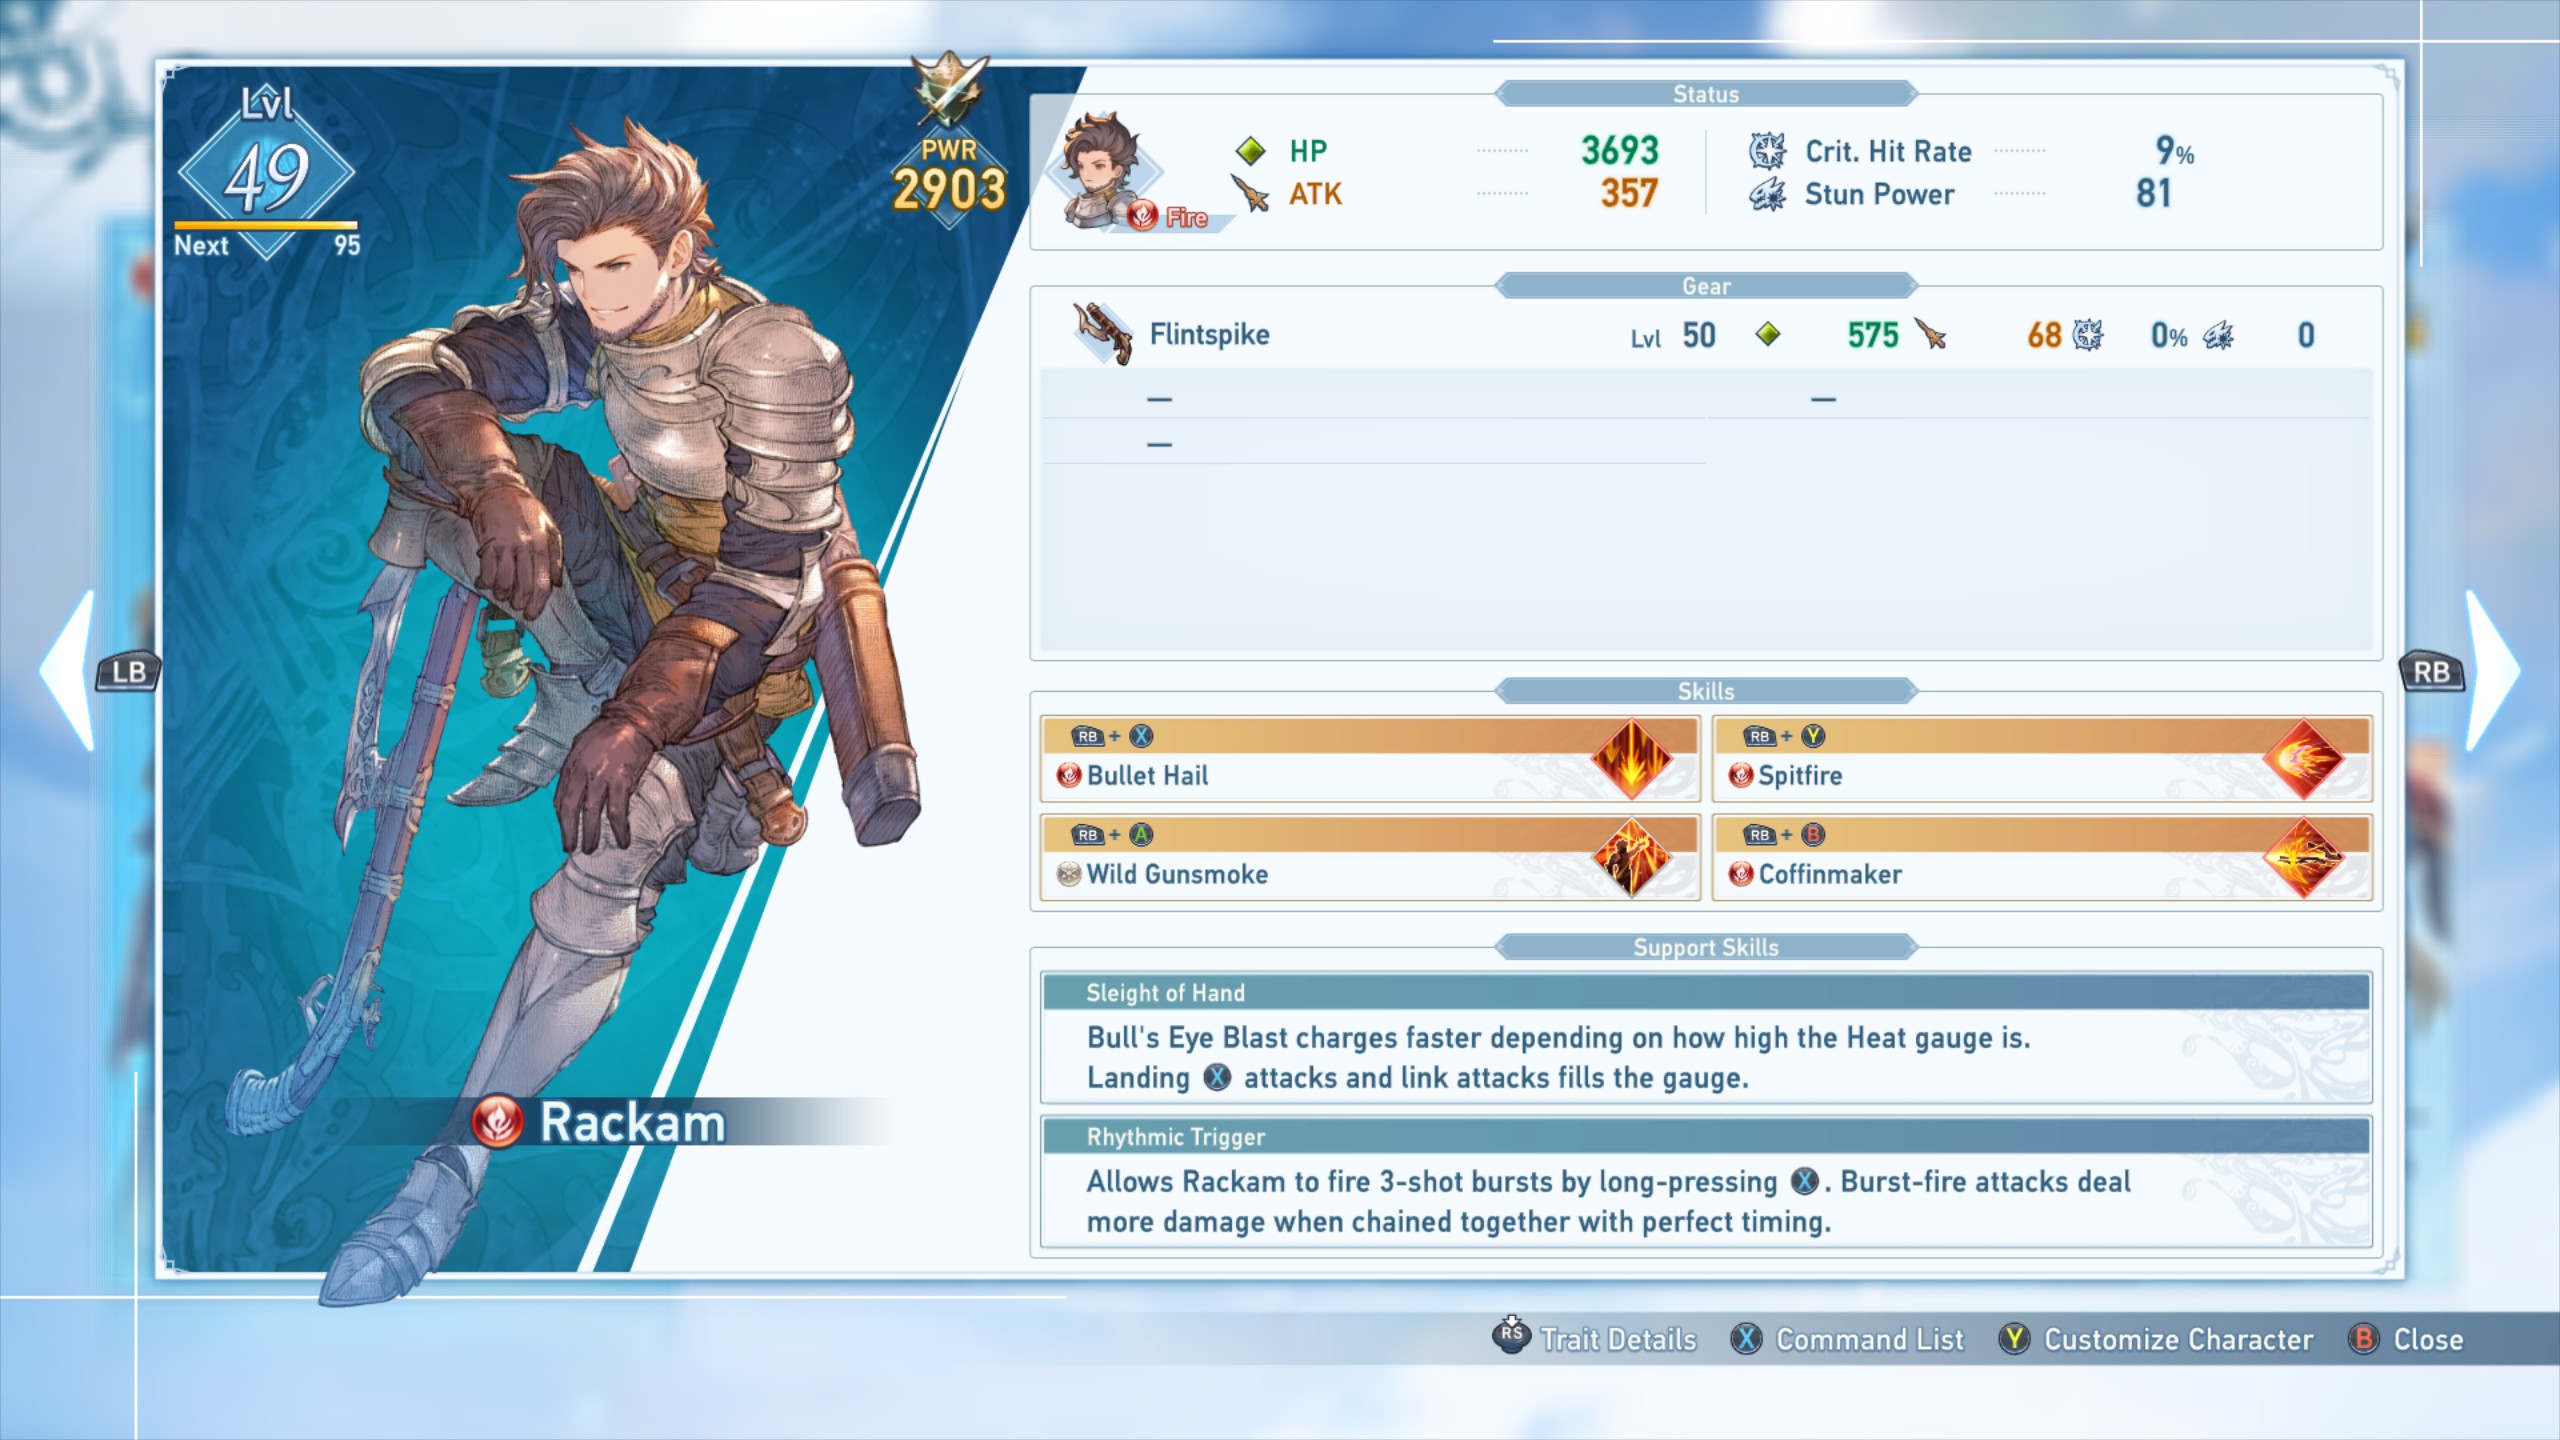 An image of Rackam's stats in Granblue Fantasy Relink.